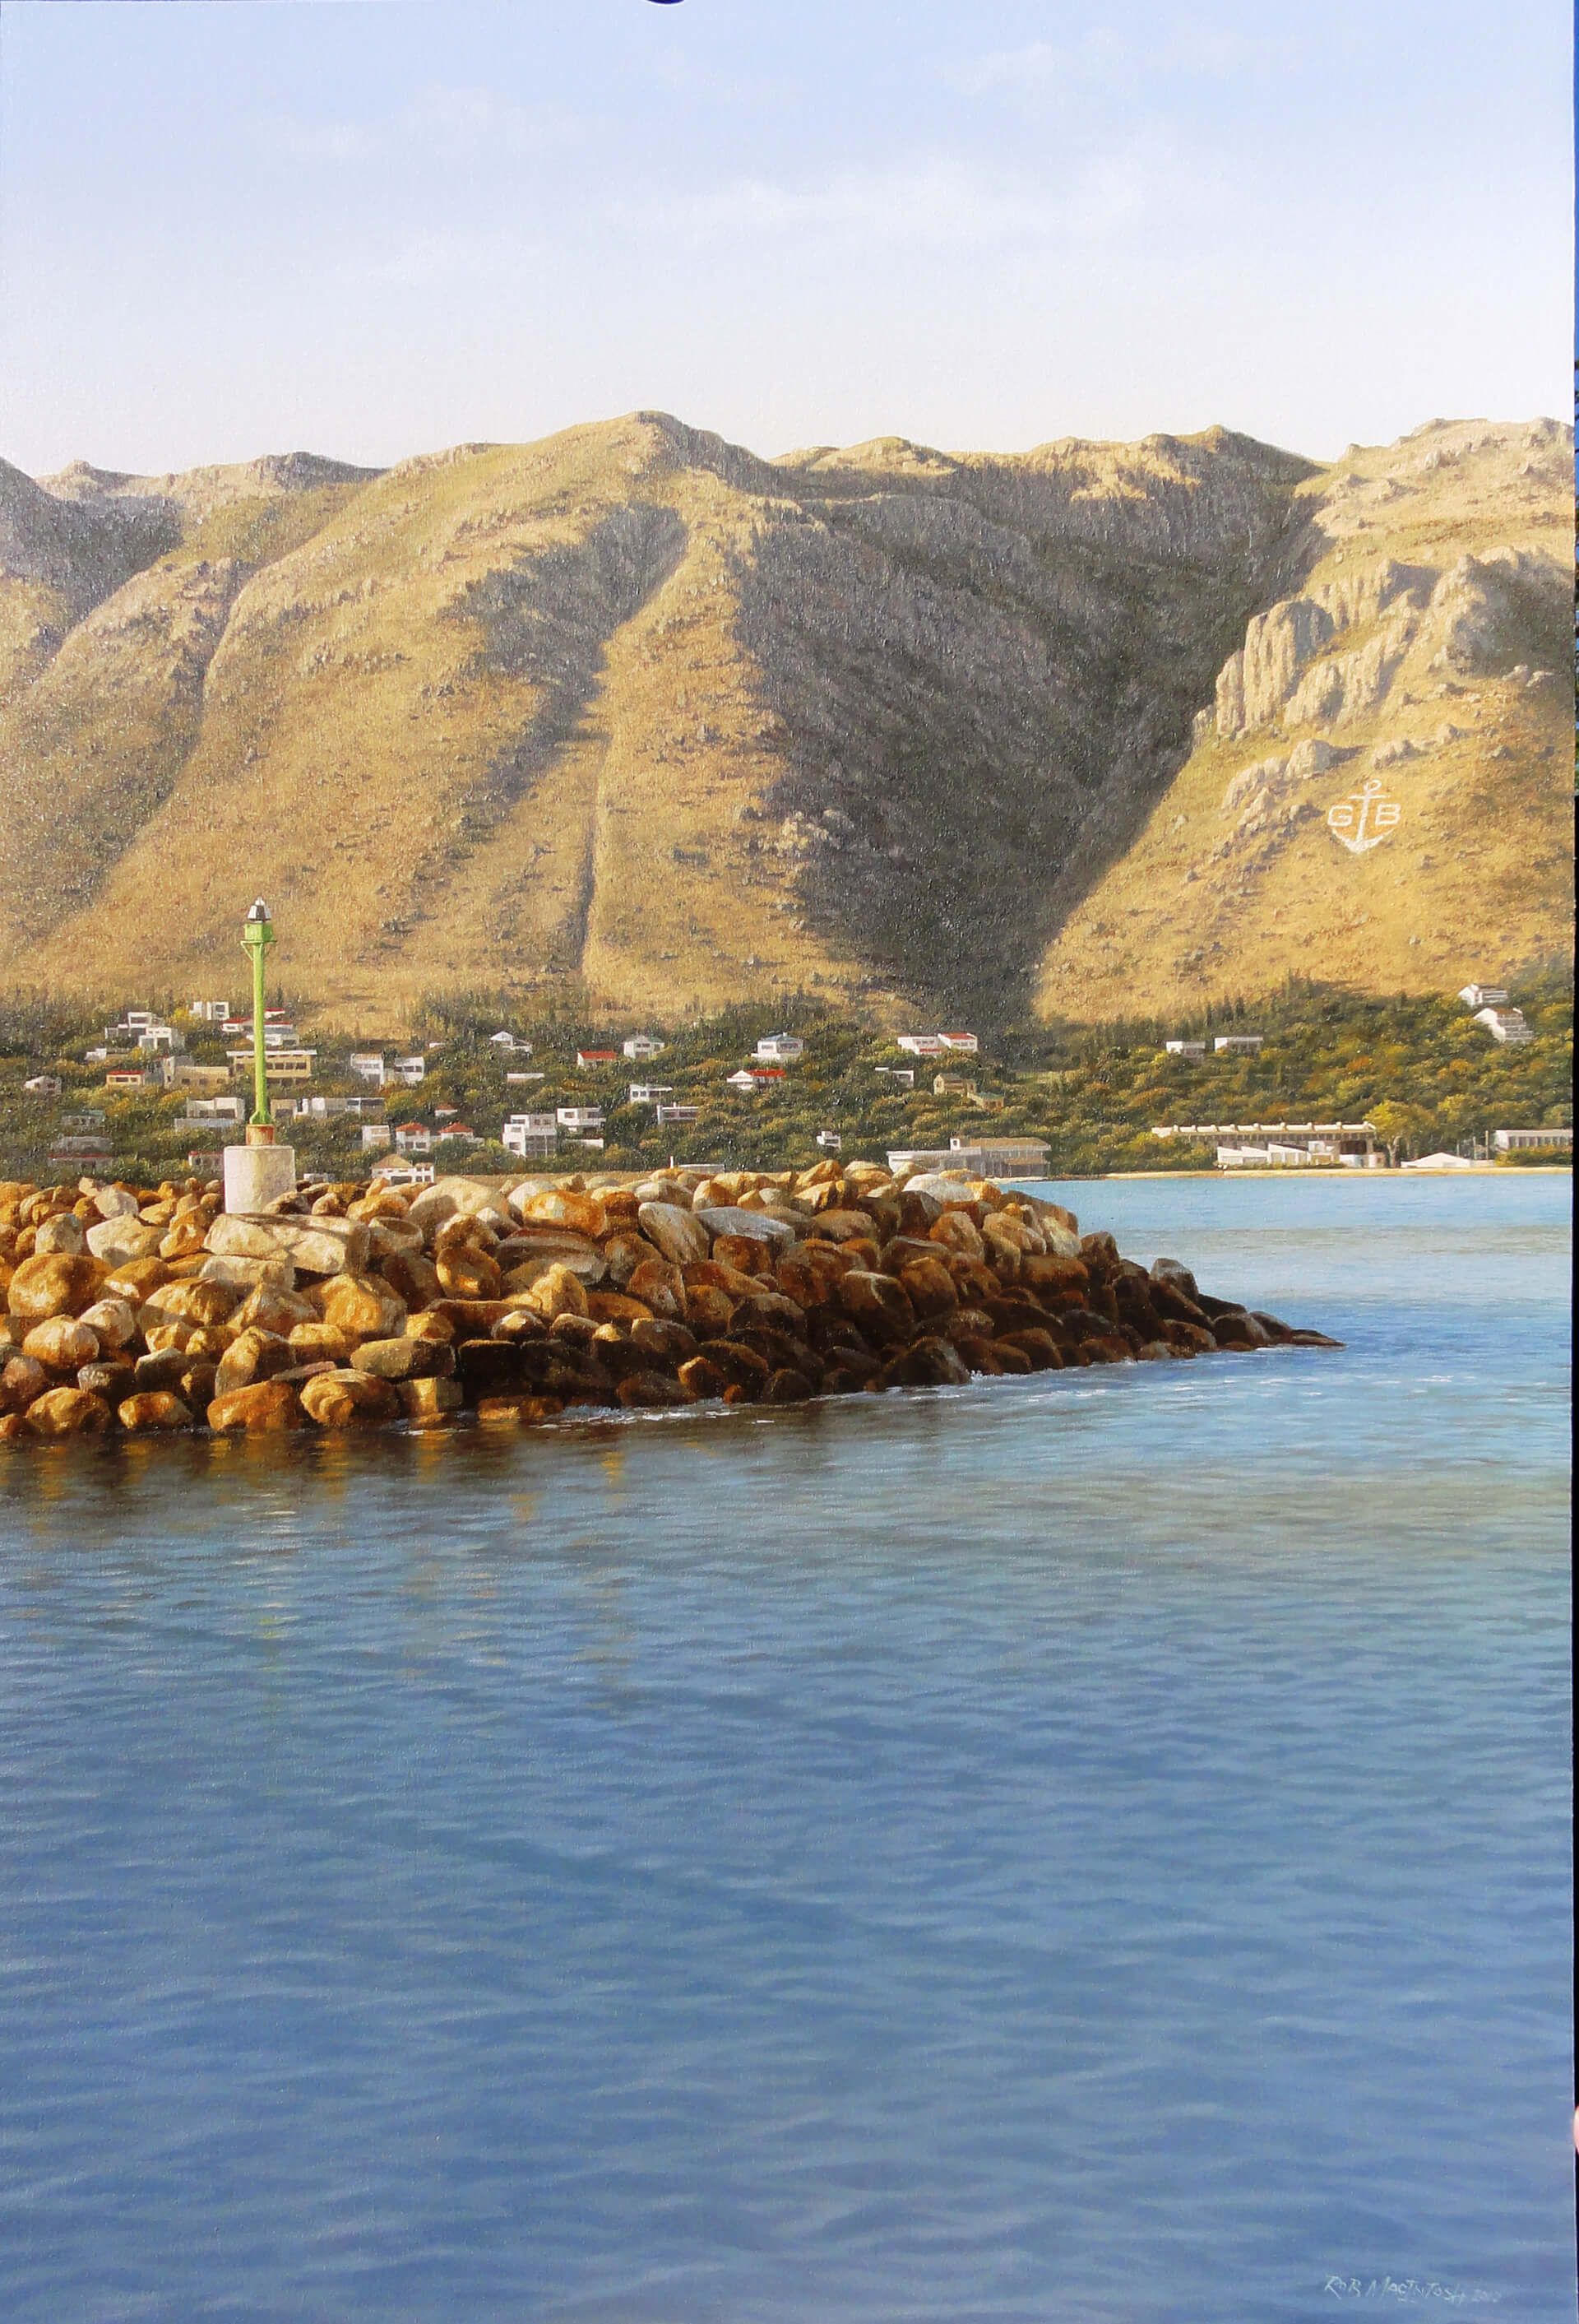 Photorealistic painting of a lamp post in Gordon's Bay